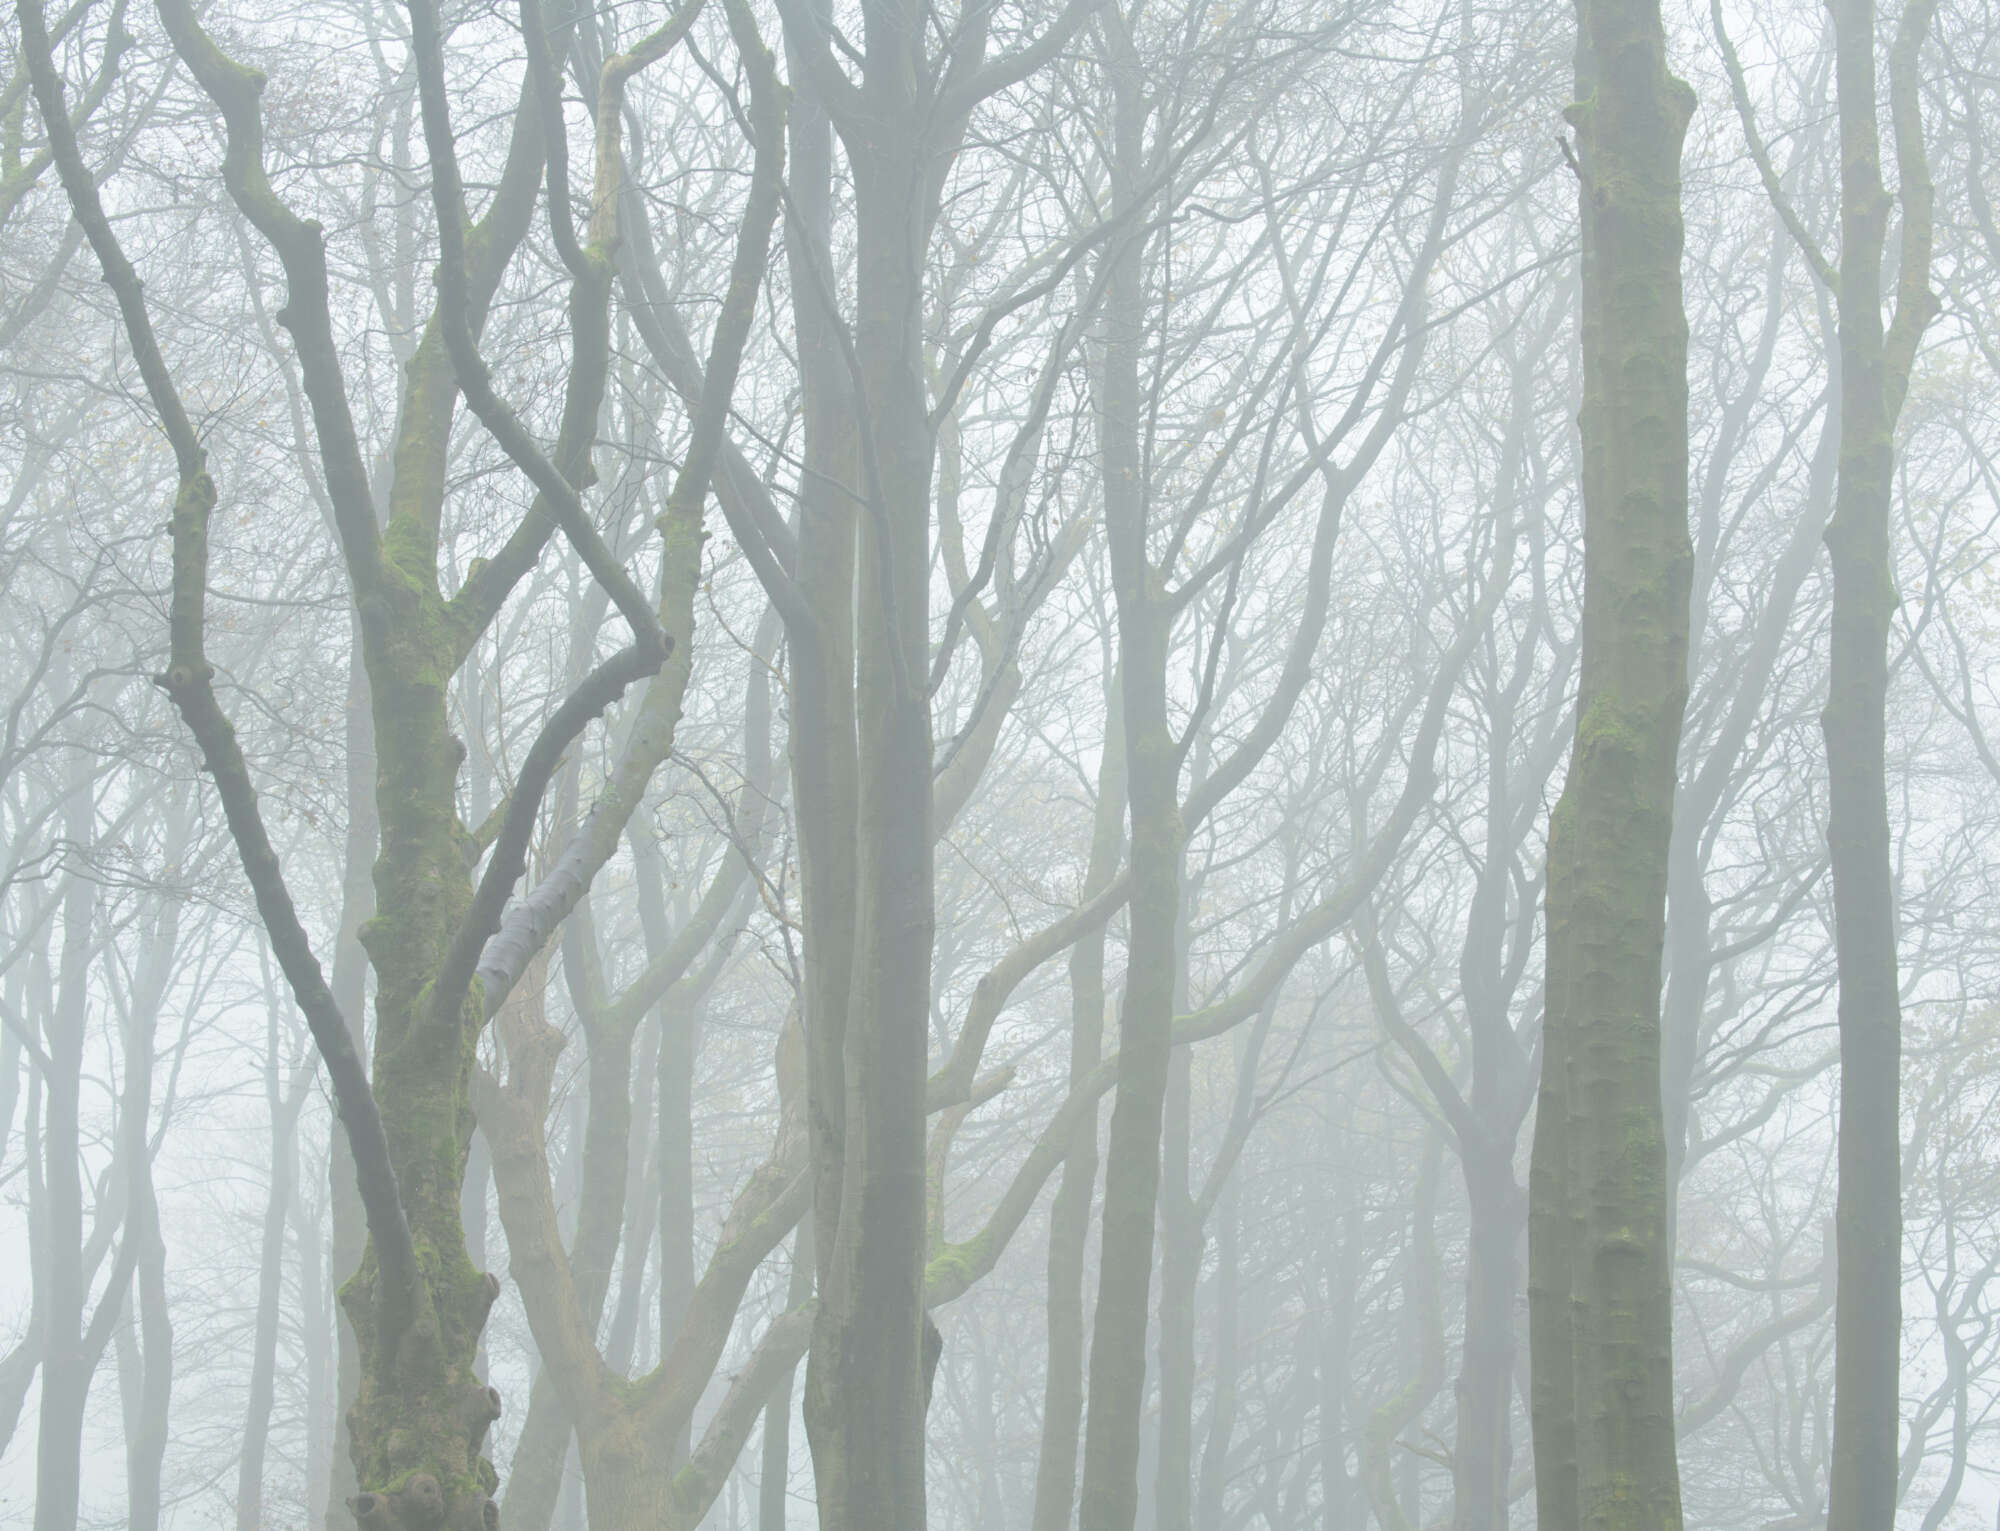 Woodlands in Mist by Paul Gallagher aspect2i